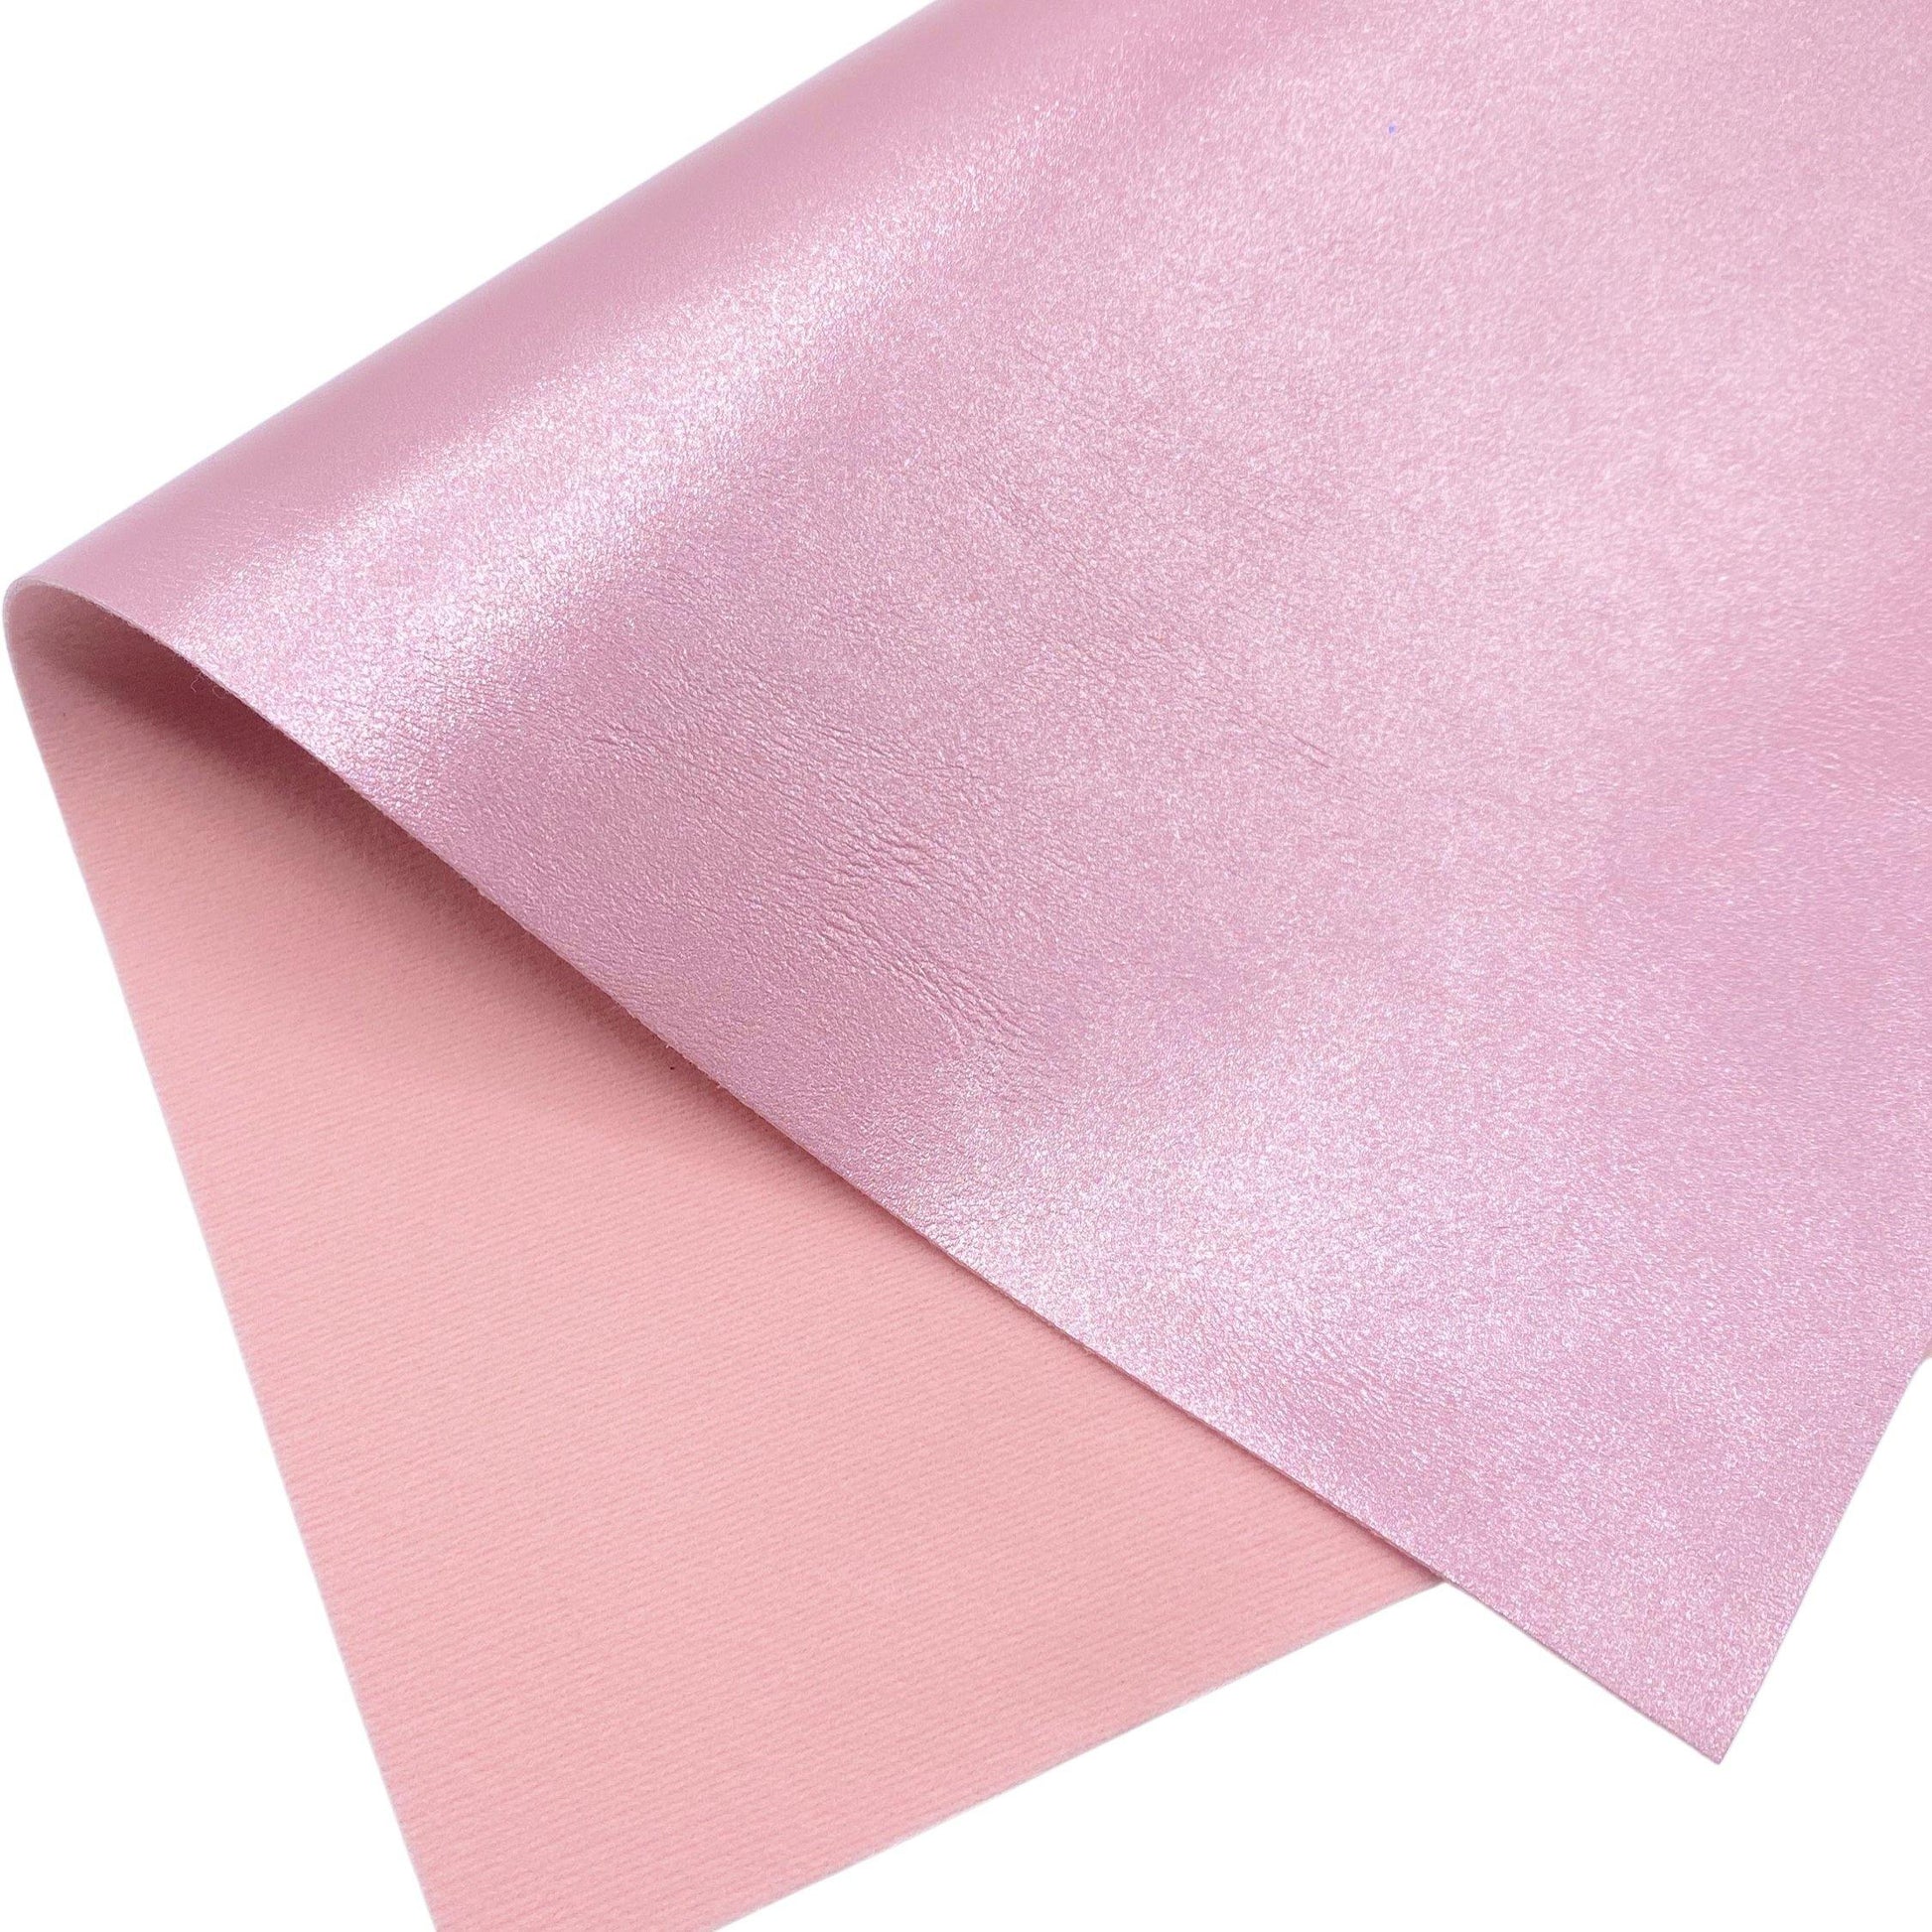 Distressed PEARL Faux Leather Sheet - Pretty in Pink Supply